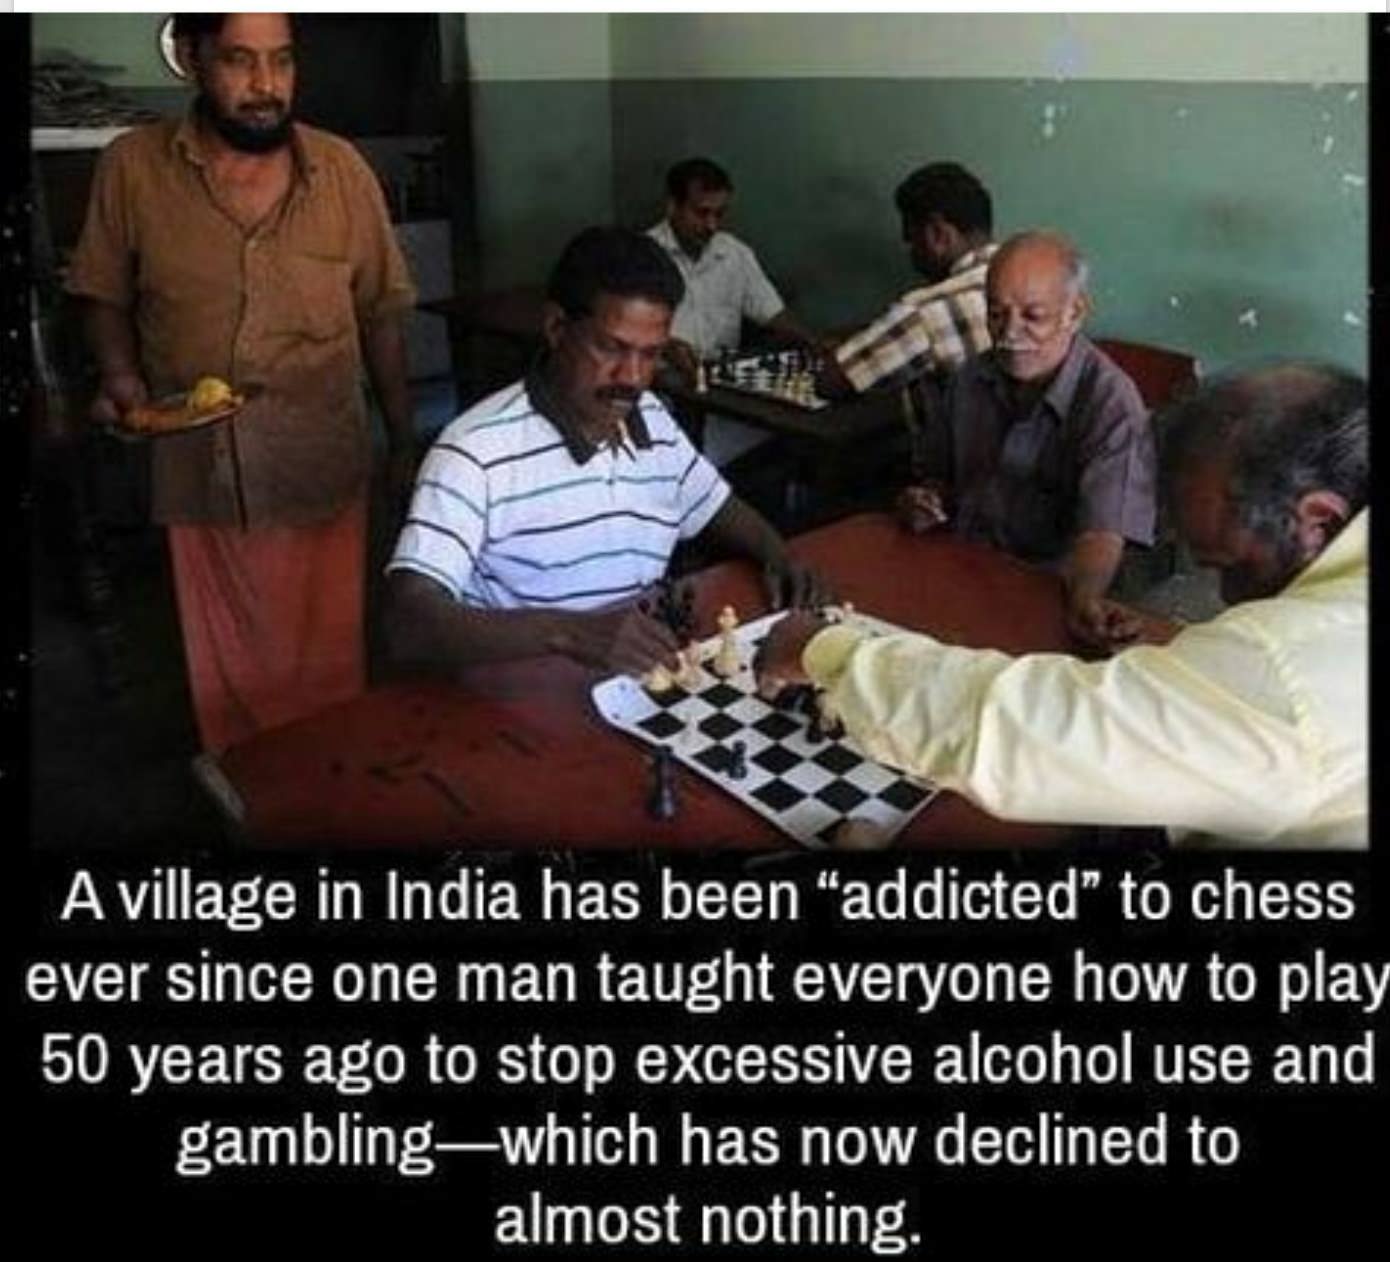 wholesome meme of village in India that has been addicted to Chess since one man tough everyone how to play to kick the habit of alcohol and gambling